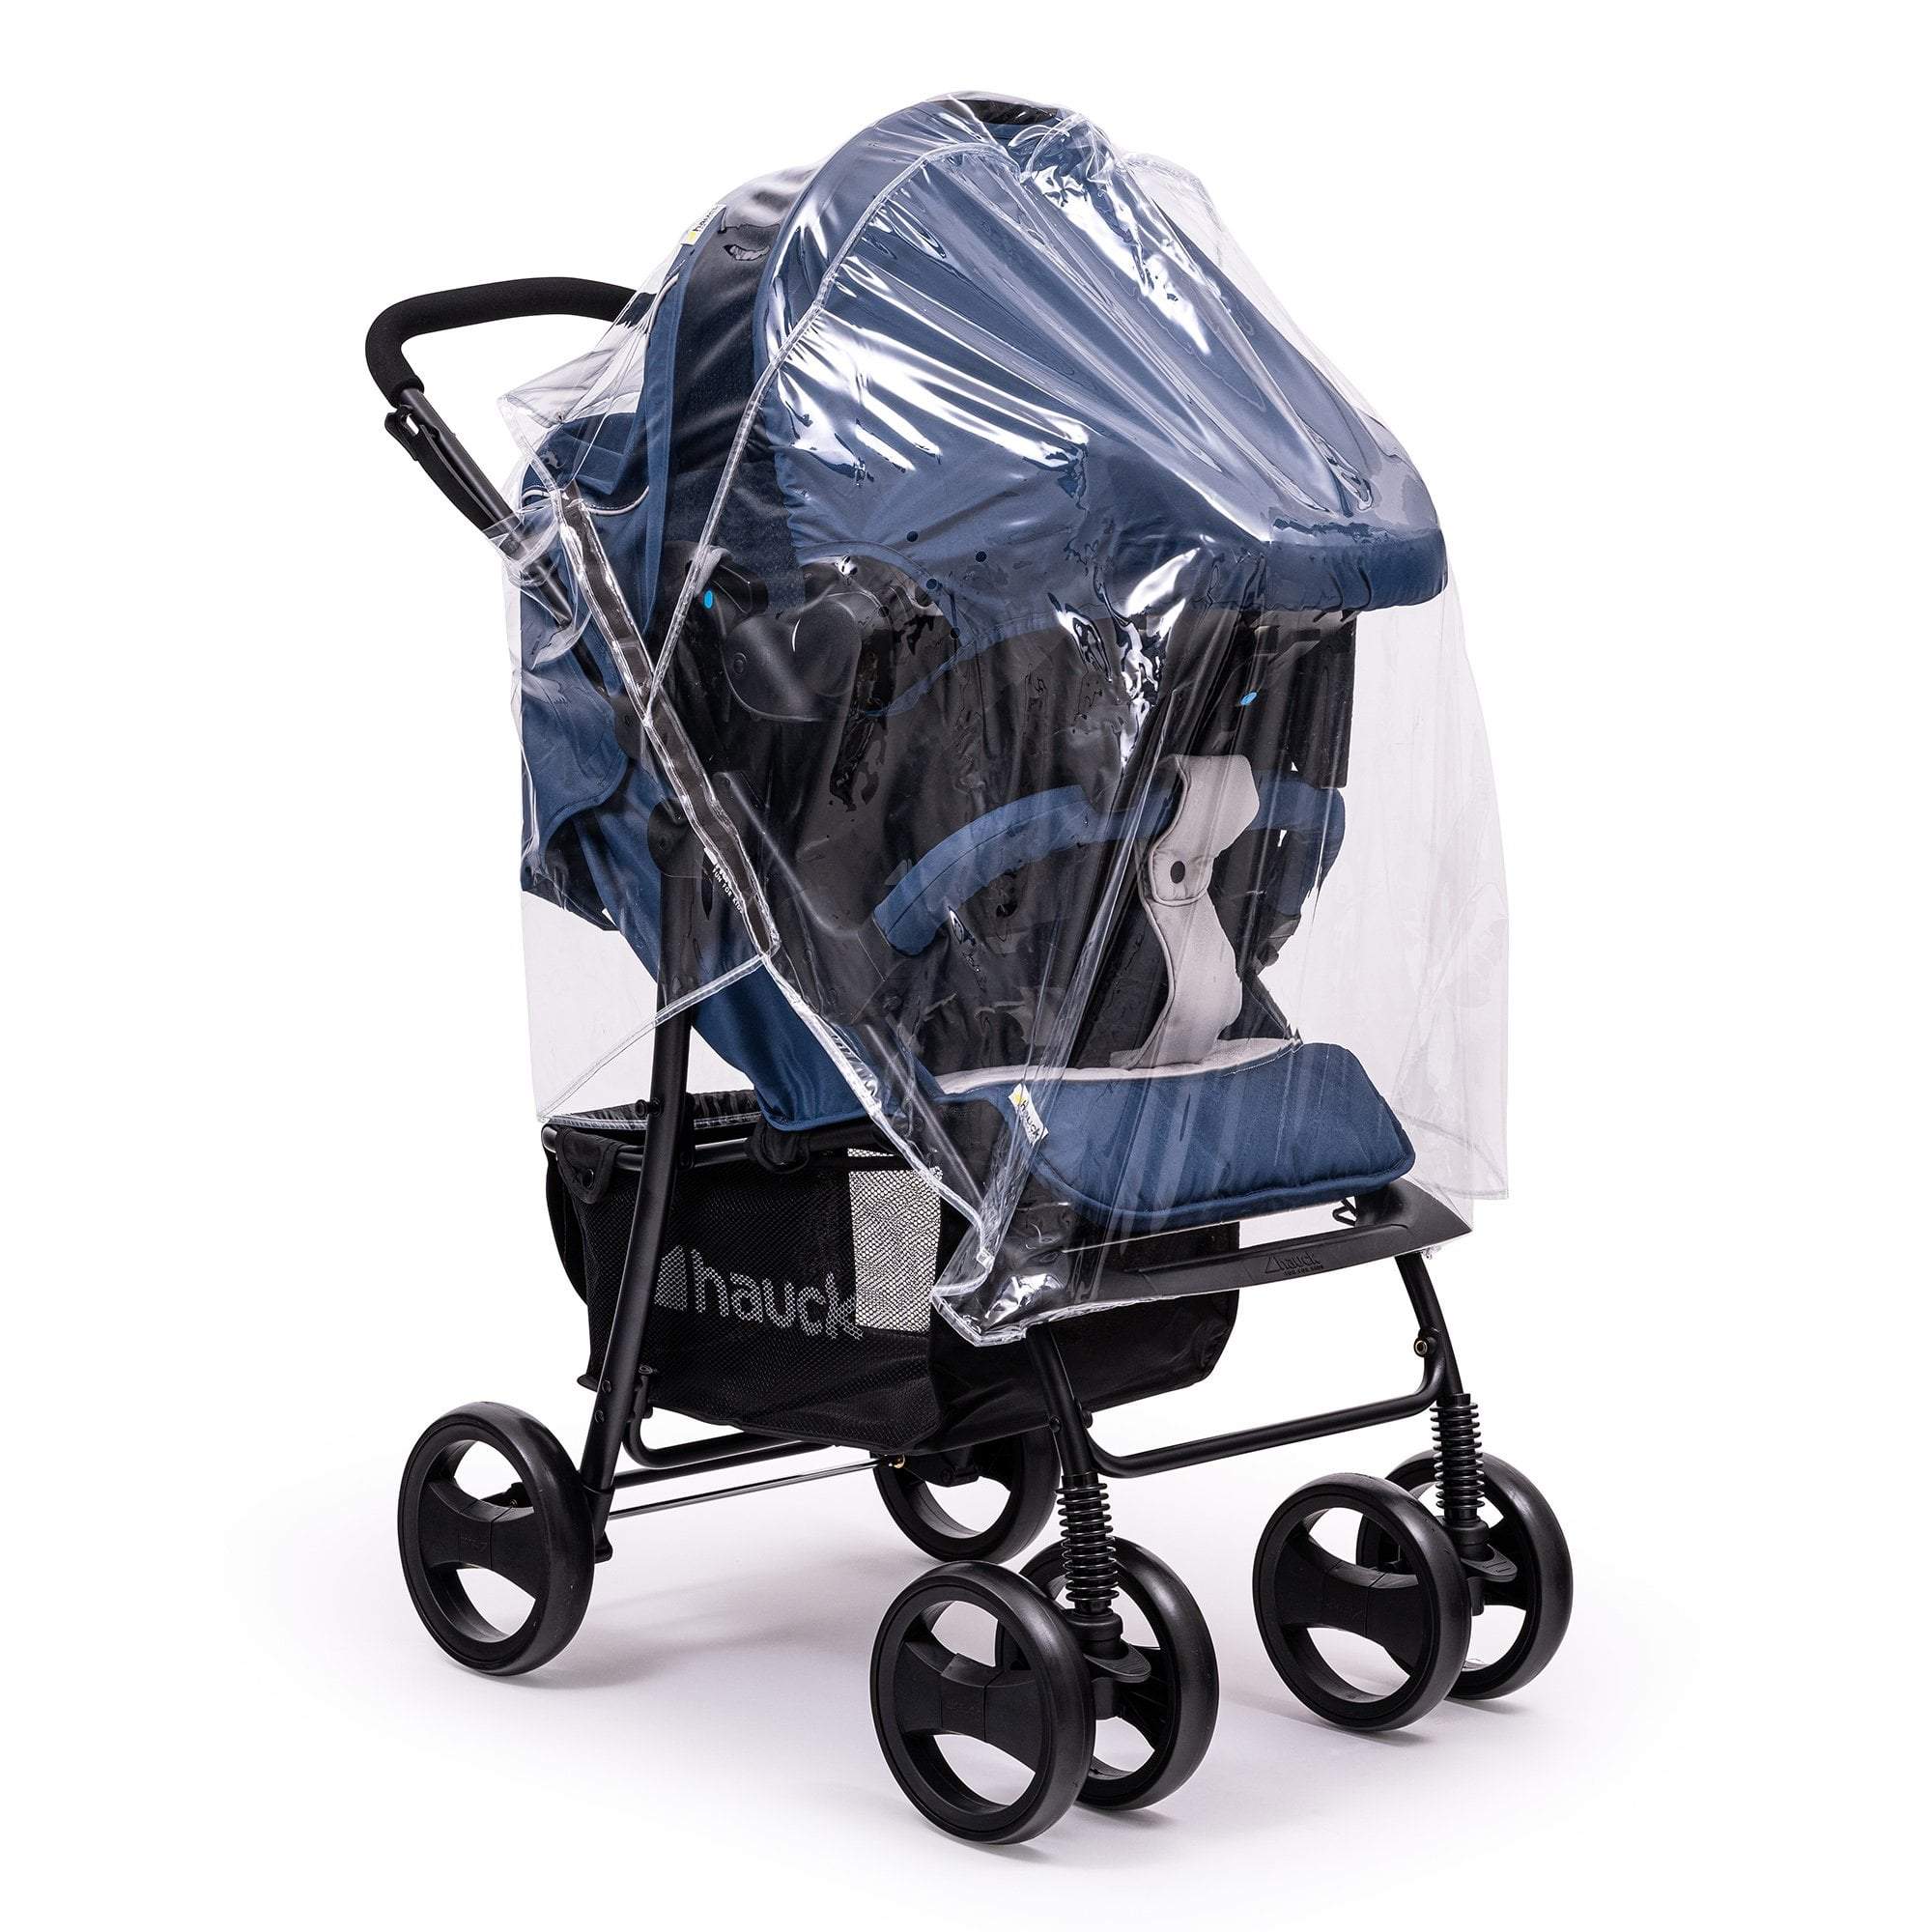 Travel System Raincover Compatible with Looping - Fits All Models - For Your Little One